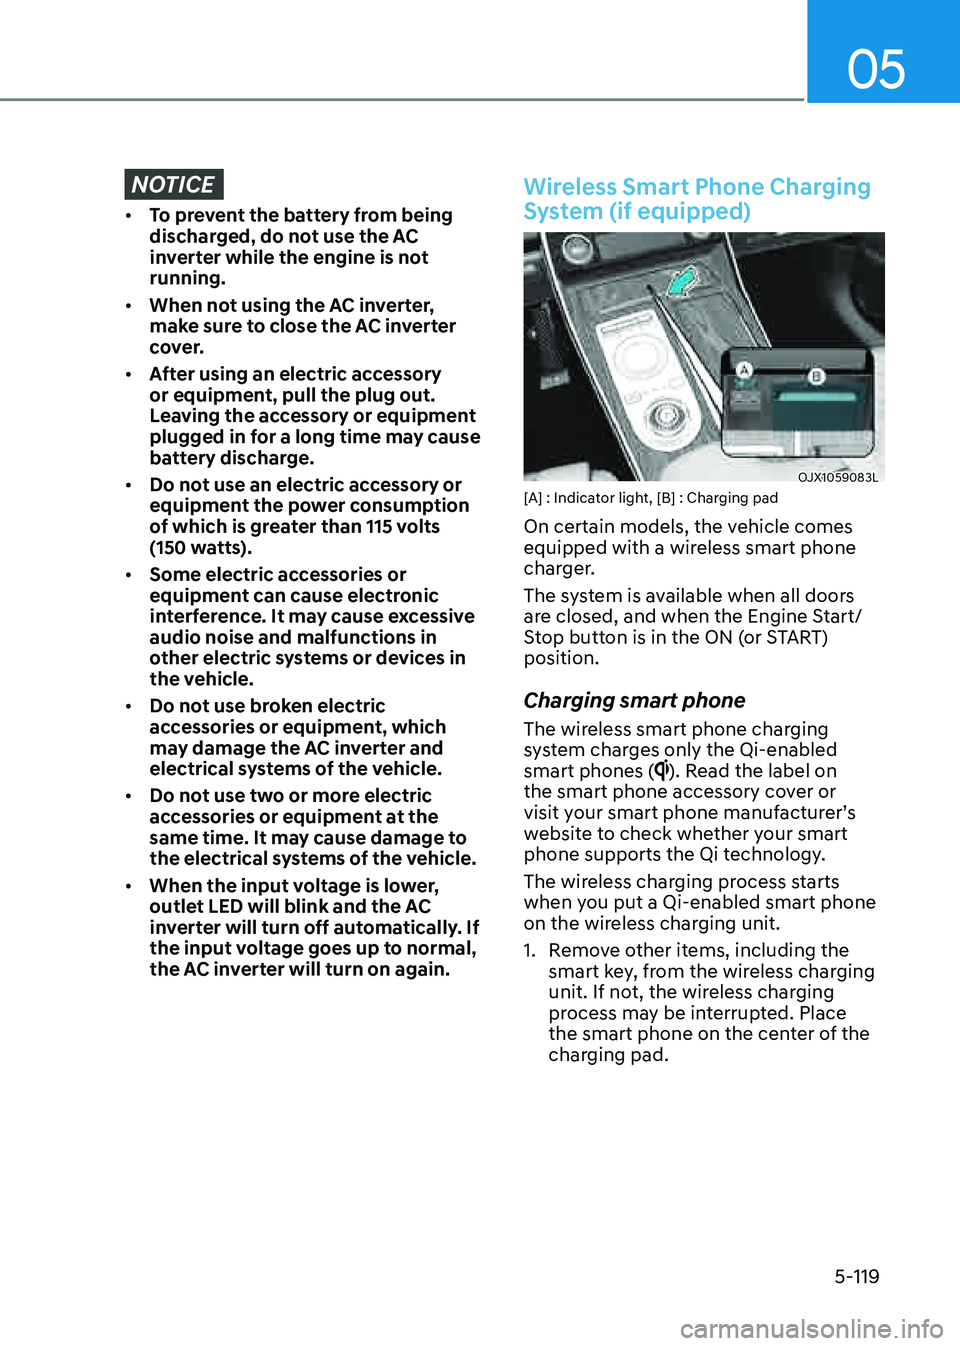 GENESIS GV80 2021  Owners Manual 05
5-119
NOTICE
• To prevent the battery from being 
discharged, do not use the AC 
inverter while the engine is not 
running.
• When not using the AC inverter, 
make sure to close the AC inverter